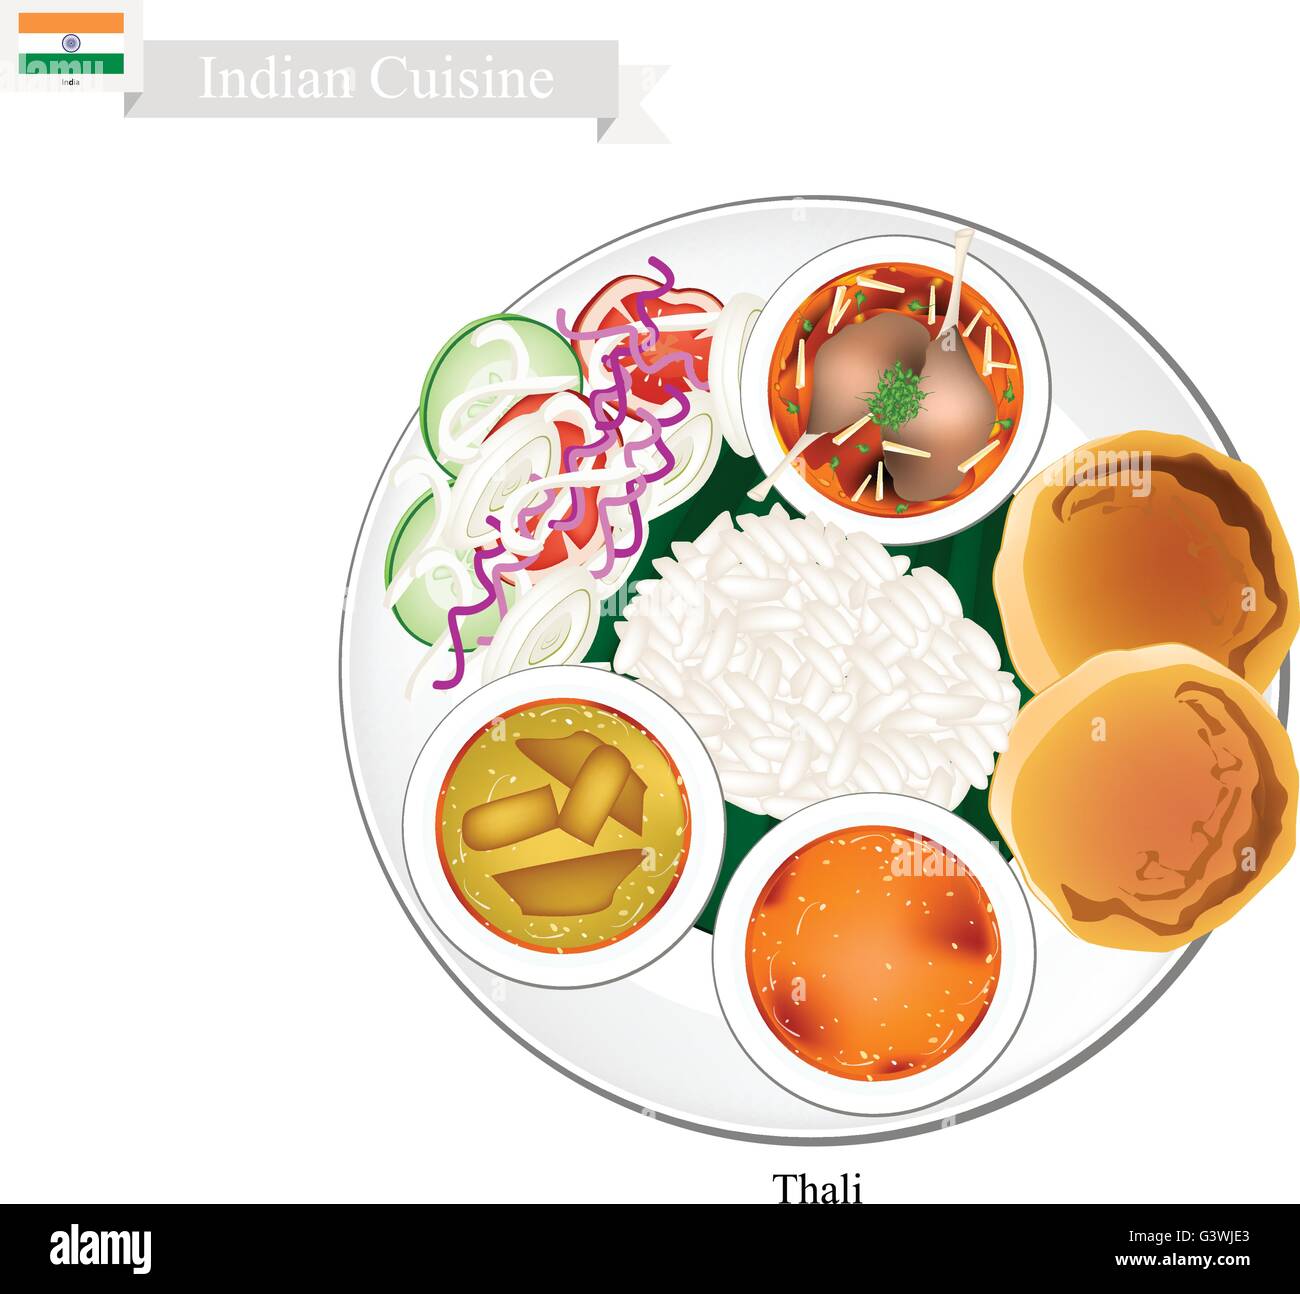 Indian Cuisine, Thali or Traditional Steamed Rice and Flatbread Served with Indian Bean Soup, Sambar and Curry Stew. One of The Stock Vector